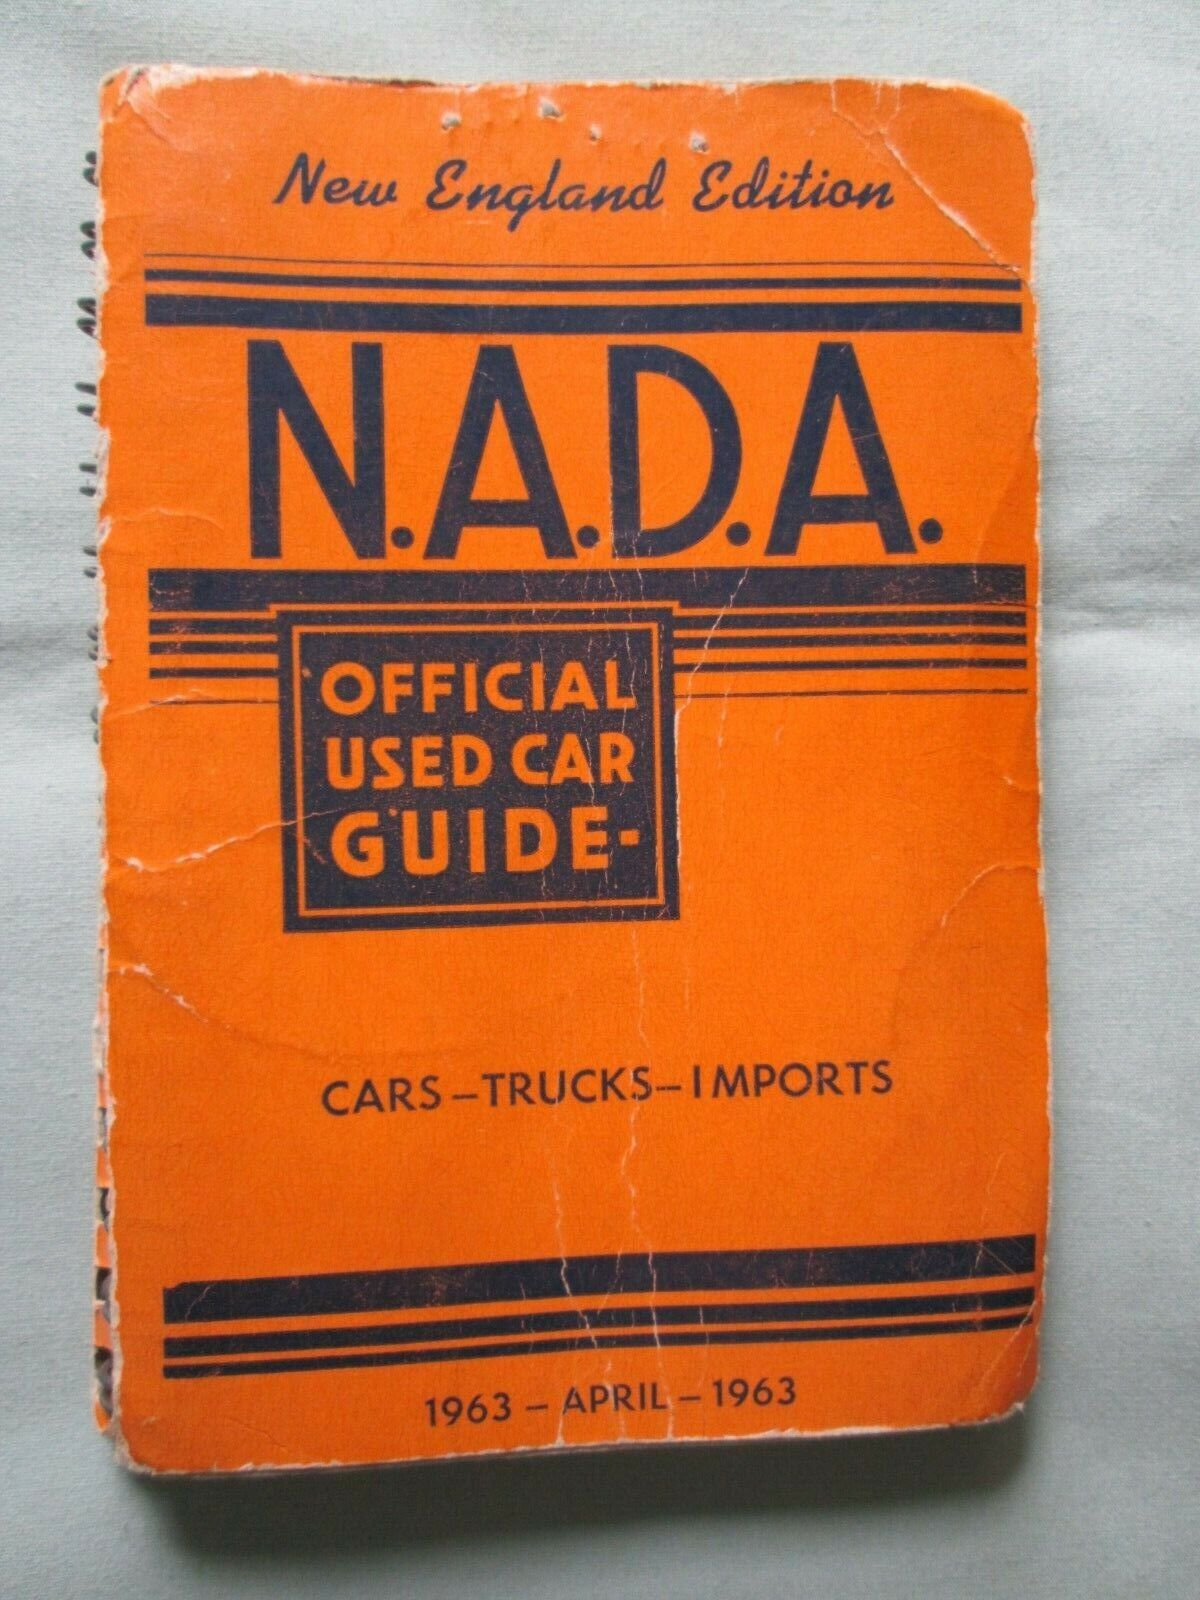 NADA N.A.D.A  Used Car Guide April 1963 New England Edition